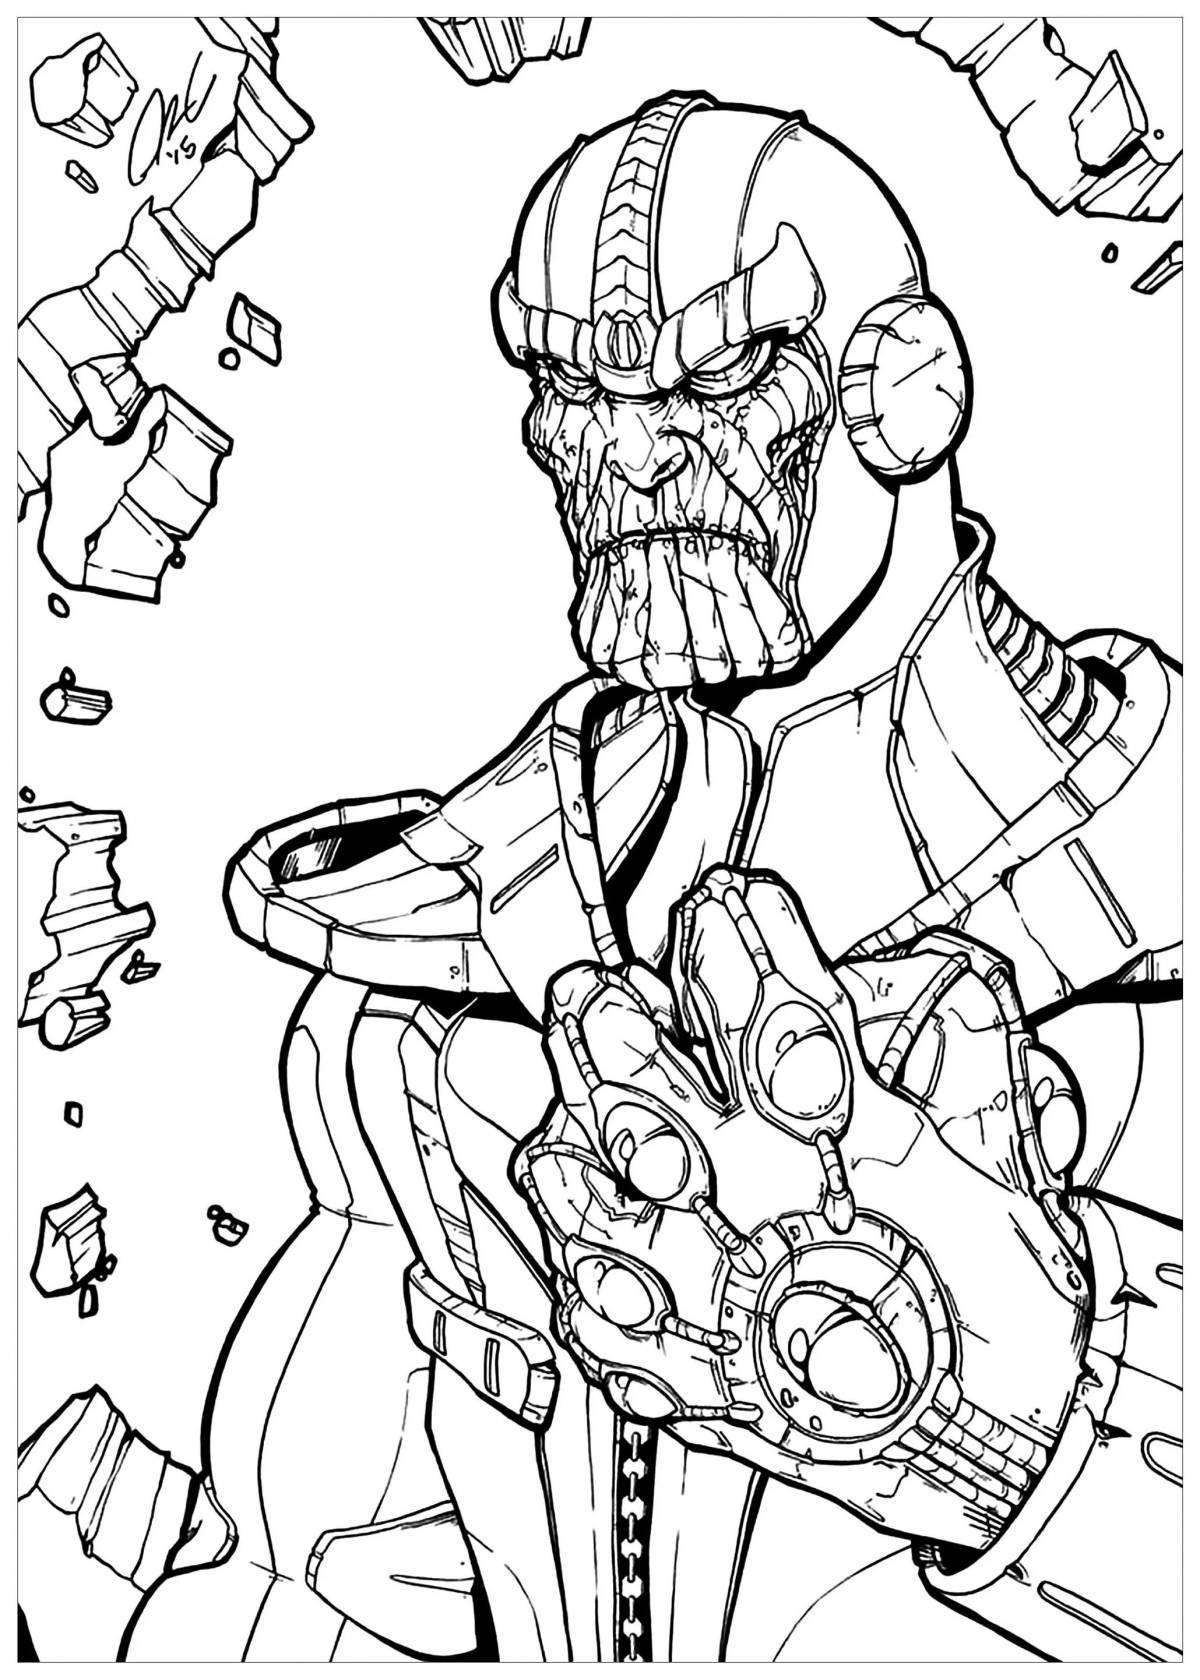 Cute thanas coloring page